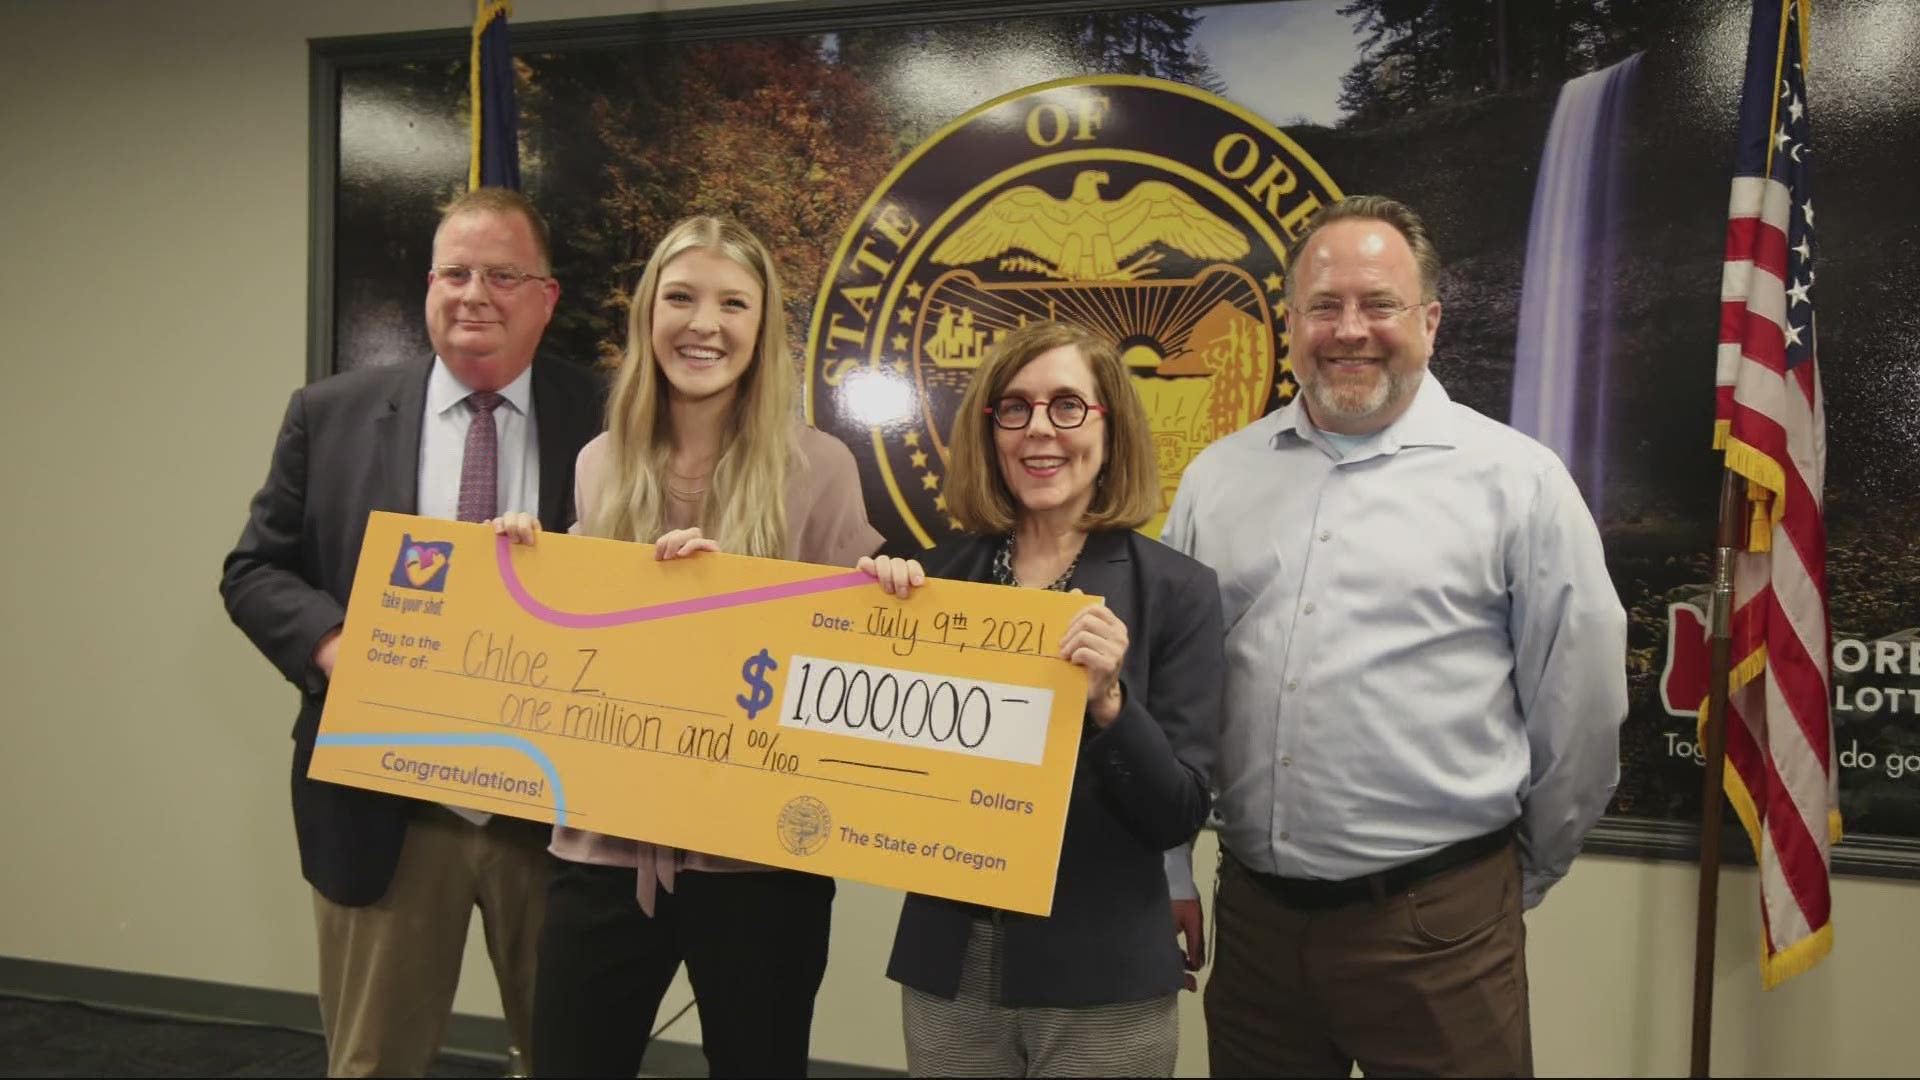 McMinnville native and college student Chloe Zinda won Oregon's vaccine lottery jackpot.